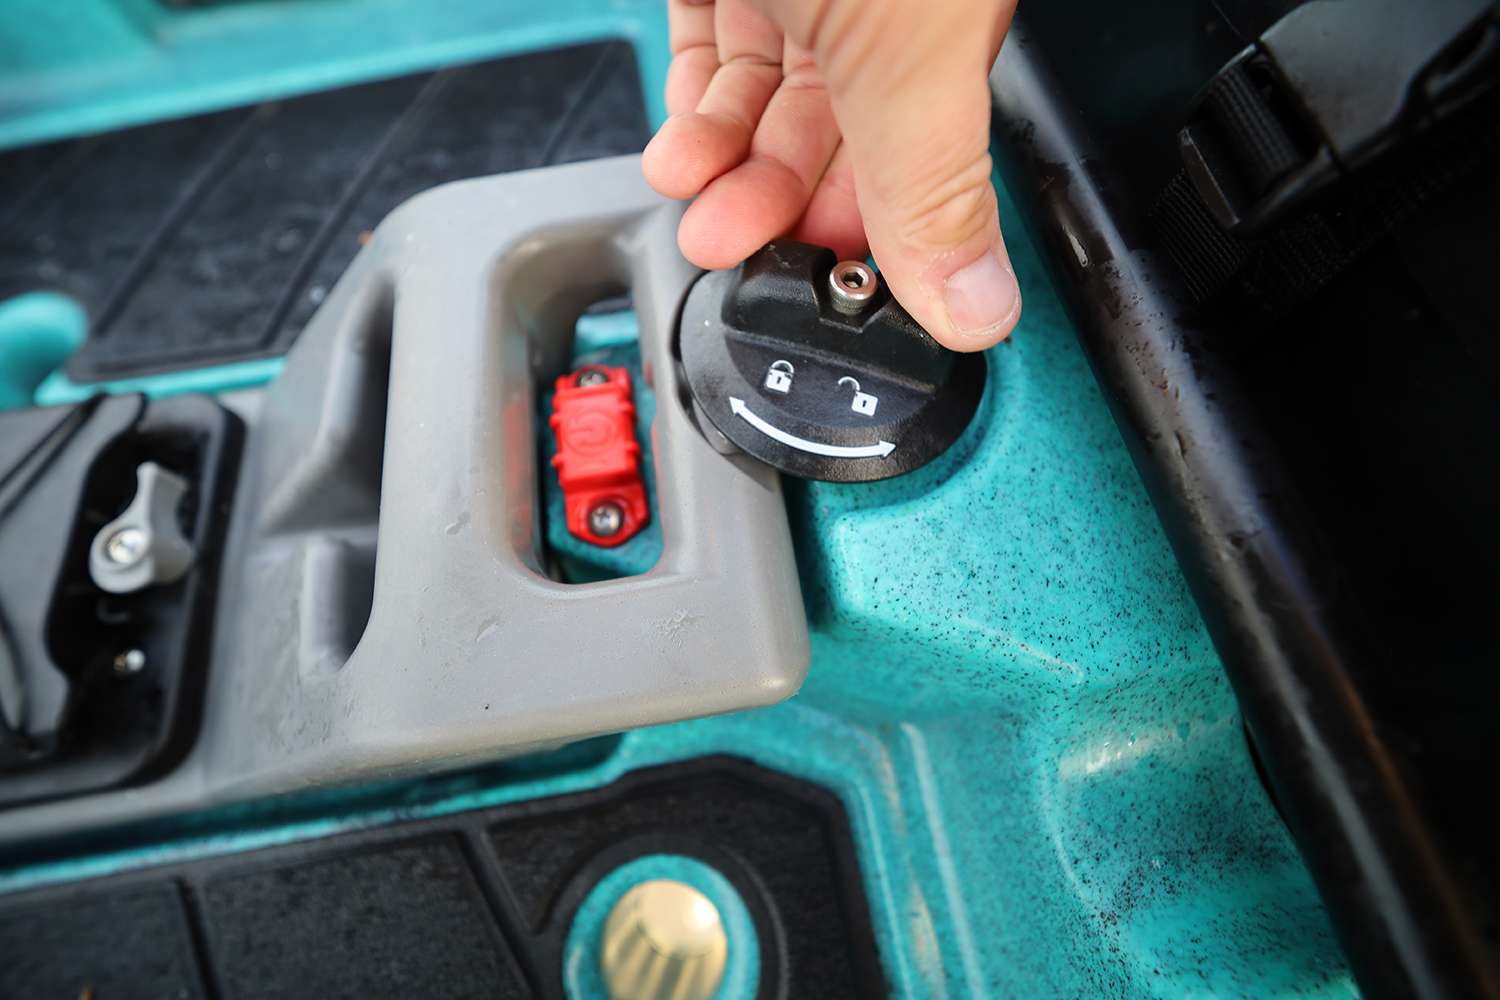 This locking device keeps the motor secured in deployed position. You'll also notice a safety kill switch. 